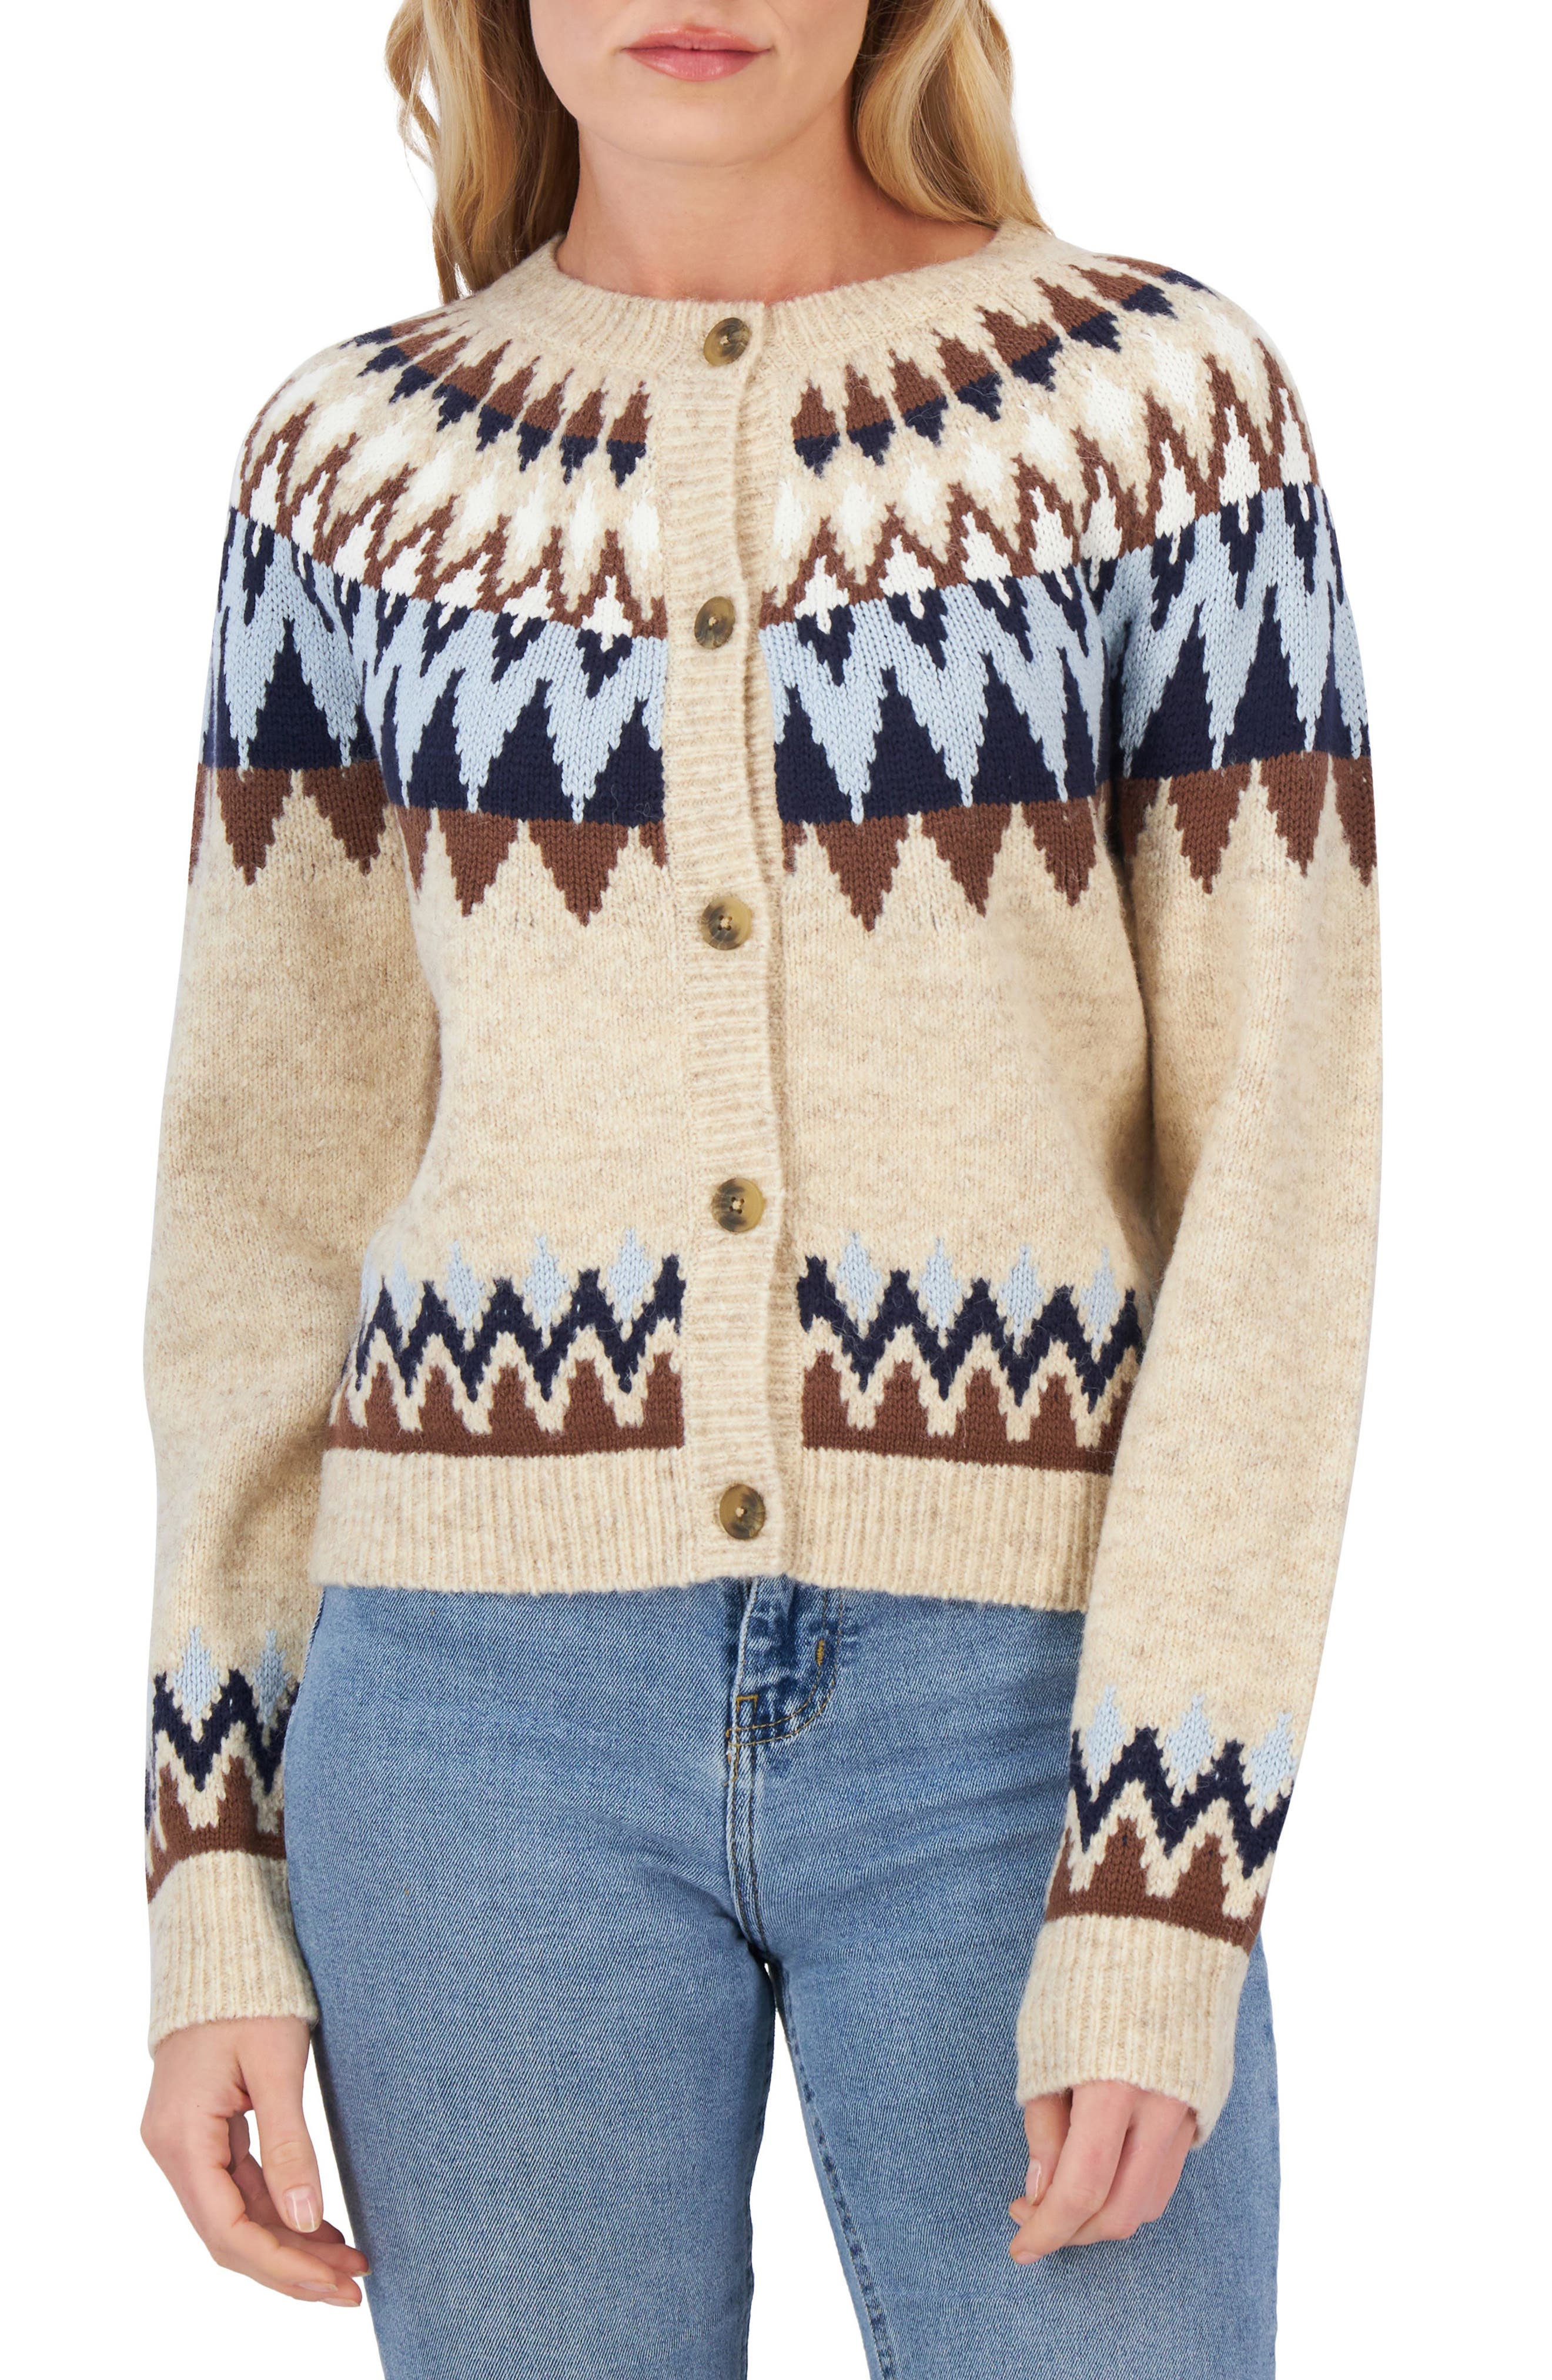 1940s Sweater Styles, Knitwear History Lucky Brand Fair Isle Cardigan in Oatmeal Combo at Nordstrom Rack Size Large $64.97 AT vintagedancer.com